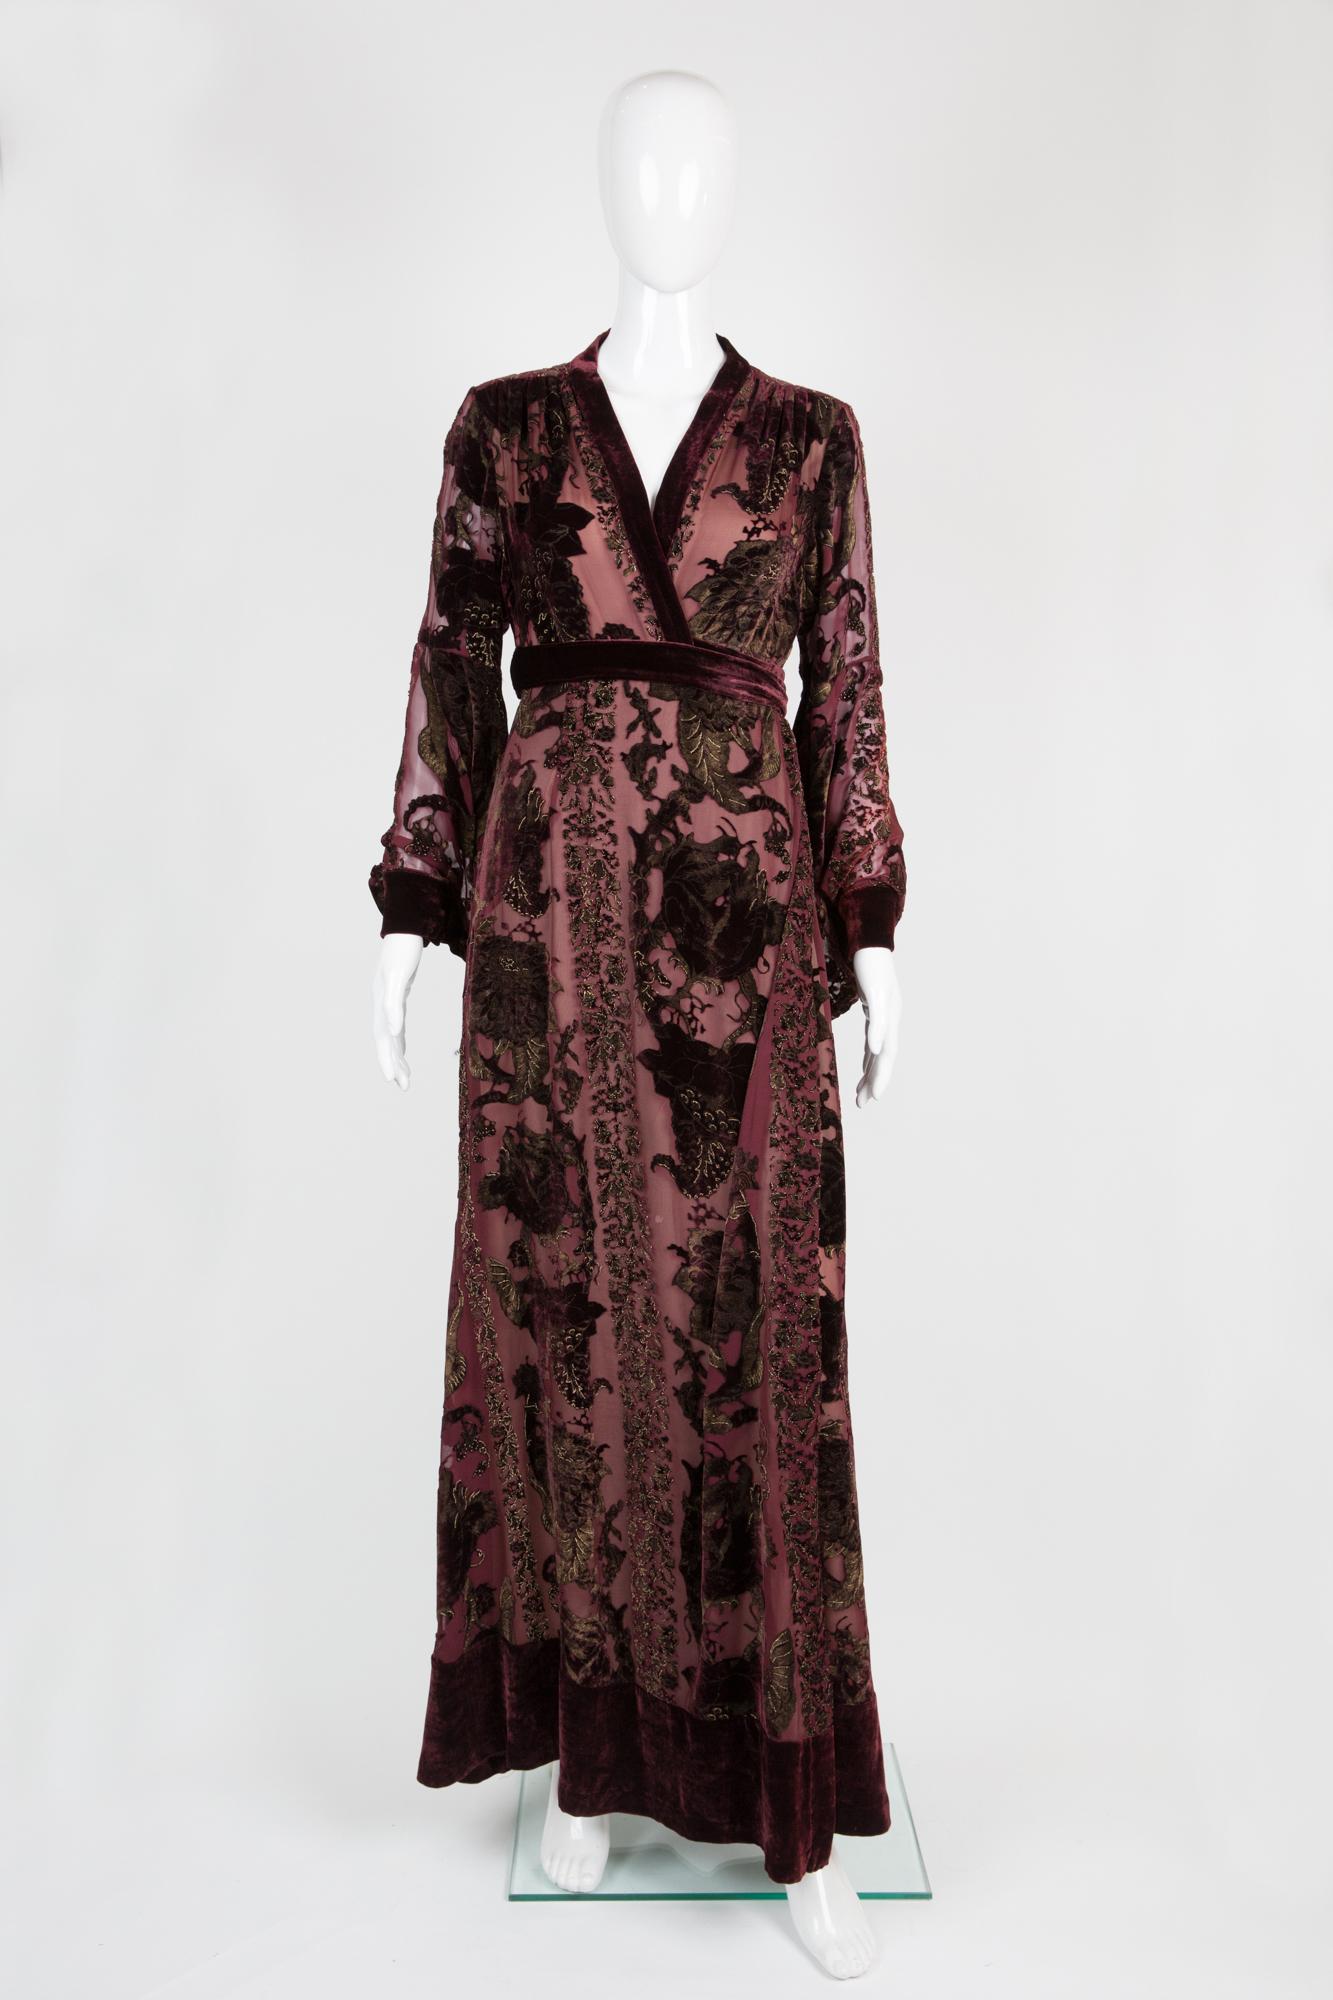 Roberto Cavalli brown silk embellished kimono dress featuring a dévoré silk pattern with gold threads, kimono sleeves, wrapped skirt part.
Estimated size 38fr/US6 /UK10
Composition: 100% silk
In excellent vintage condition. Made in Italy.
We